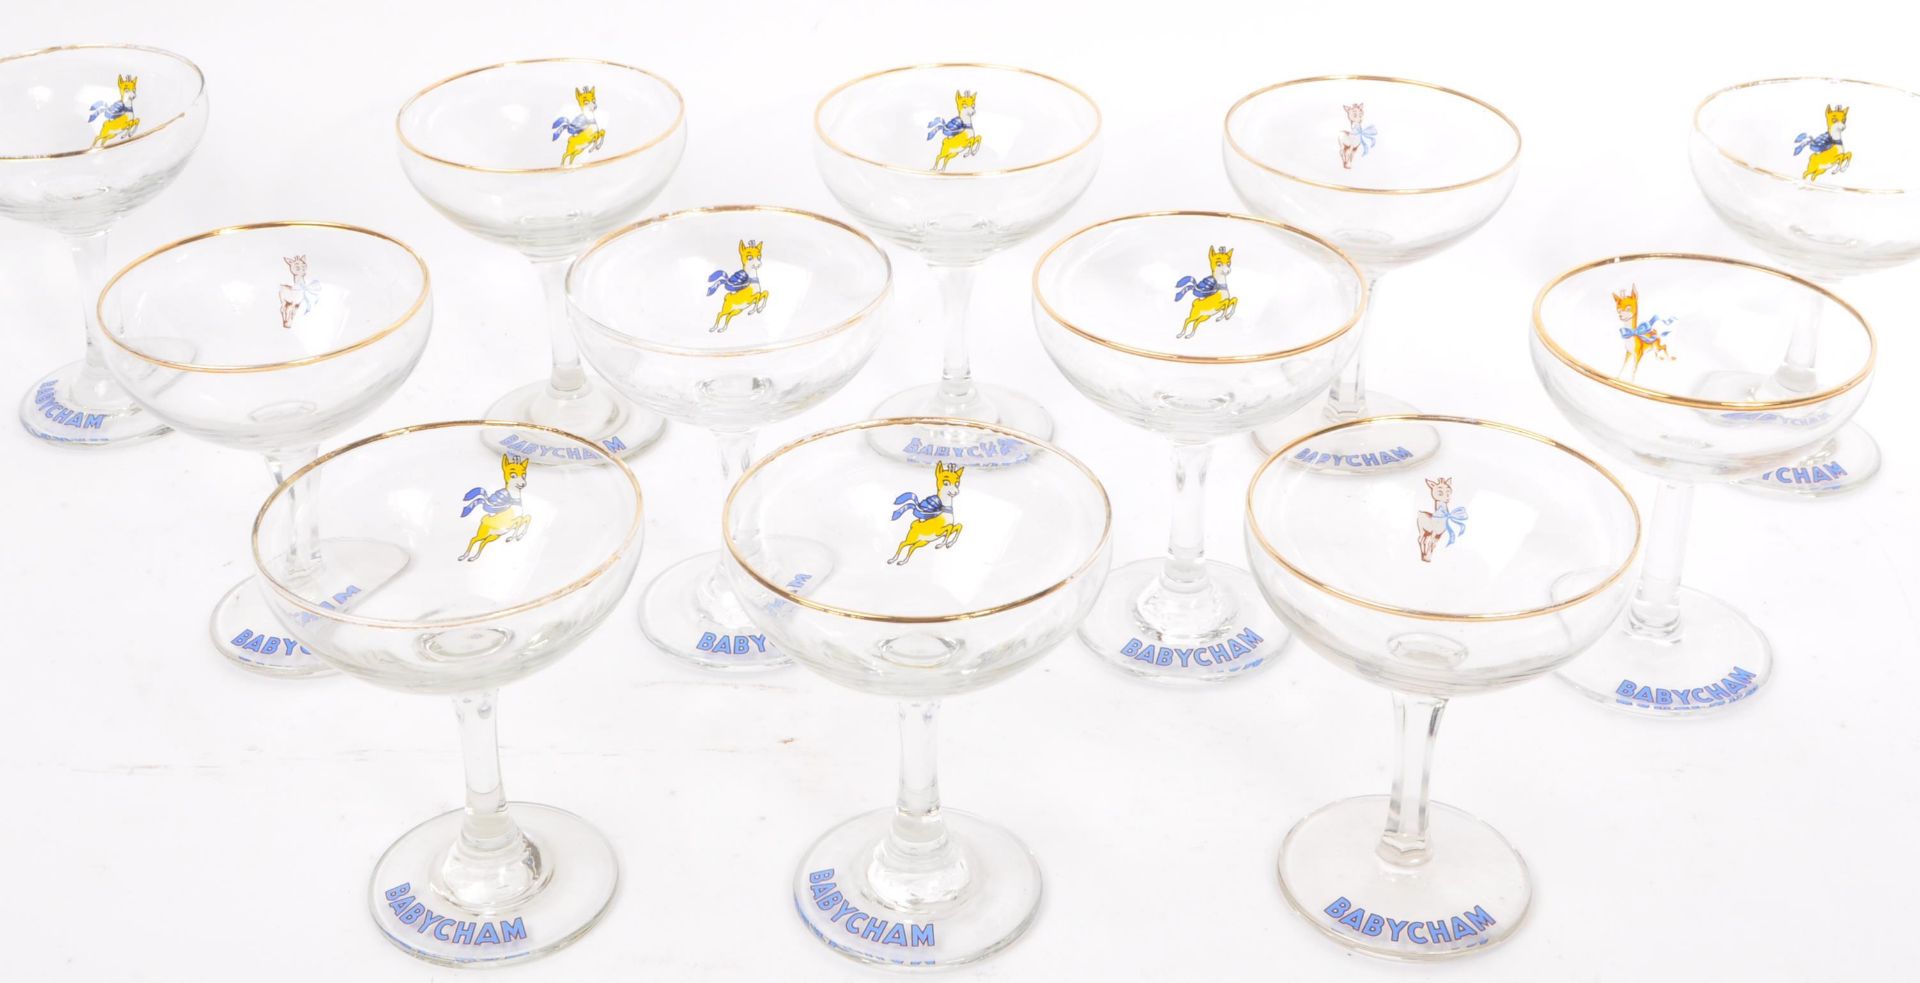 COLLECTION OF VINTAGE BABYCHAM CHAMPAGNE COUPE GLASSES - Image 3 of 6